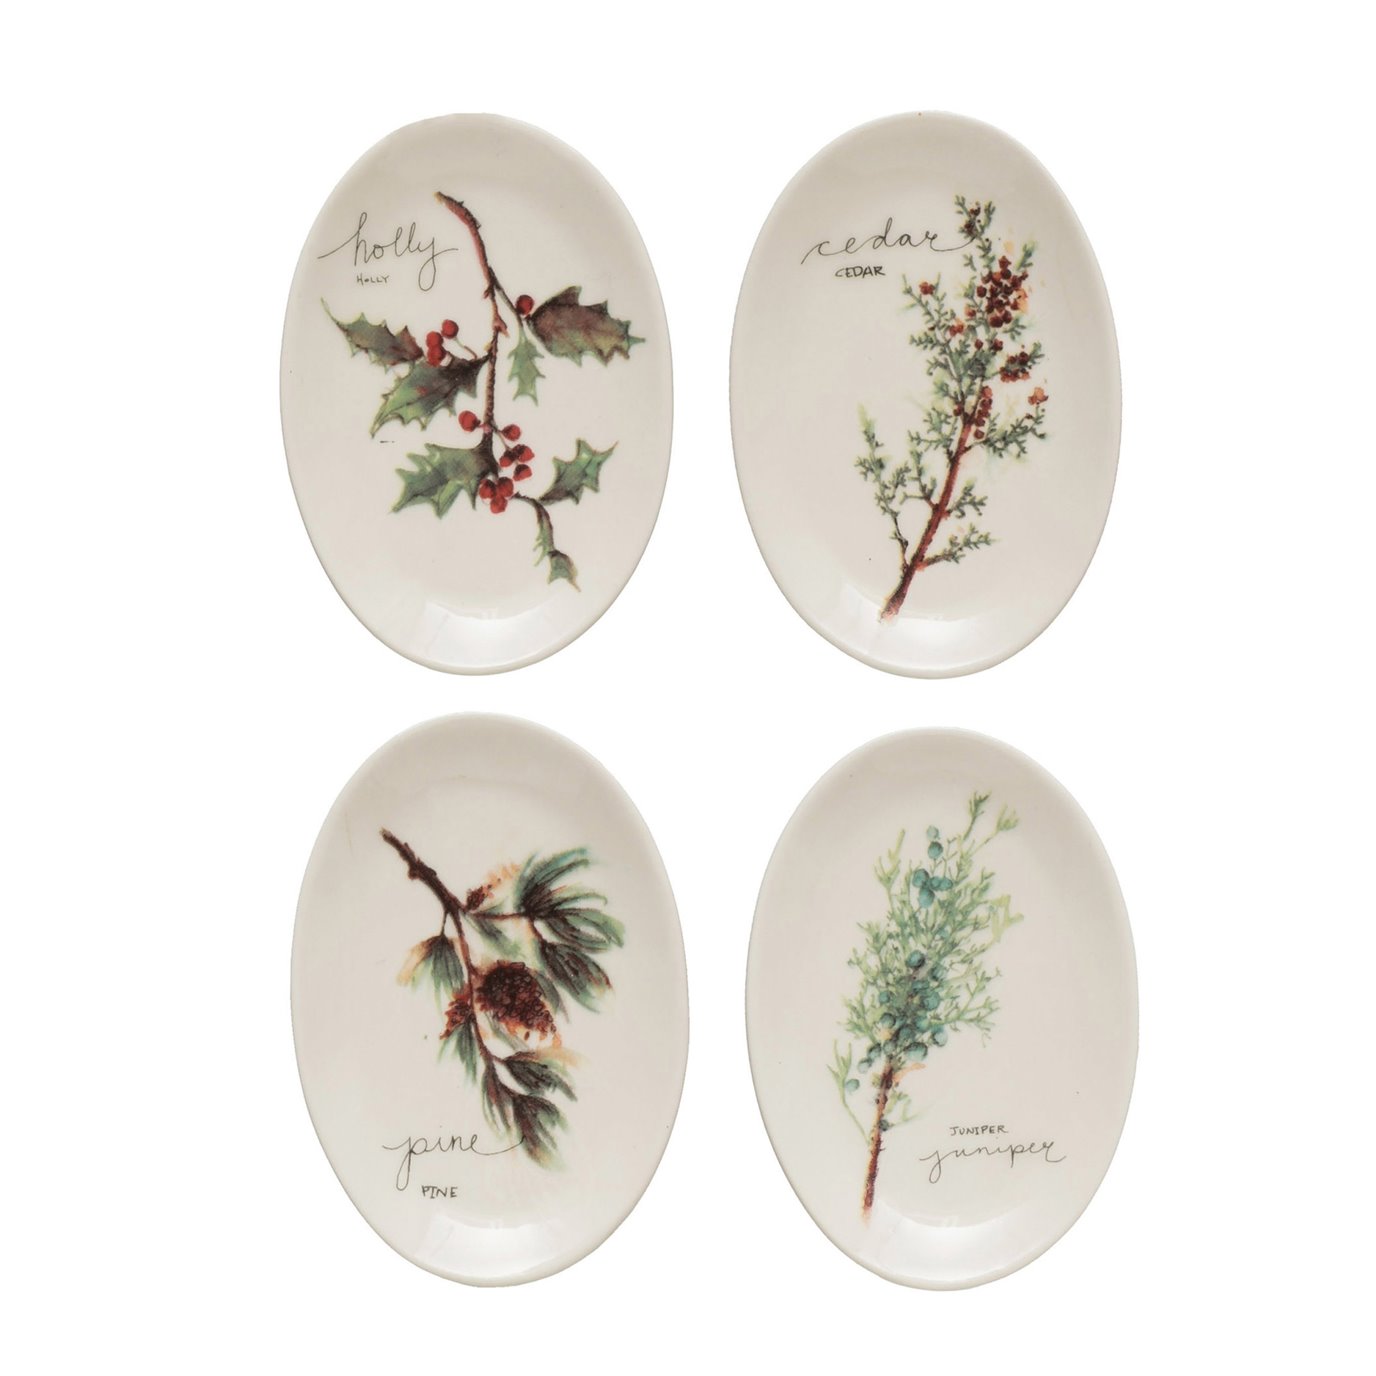 Set of 4 Assorted Stoneware Dishes with Holiday Sprigs Design